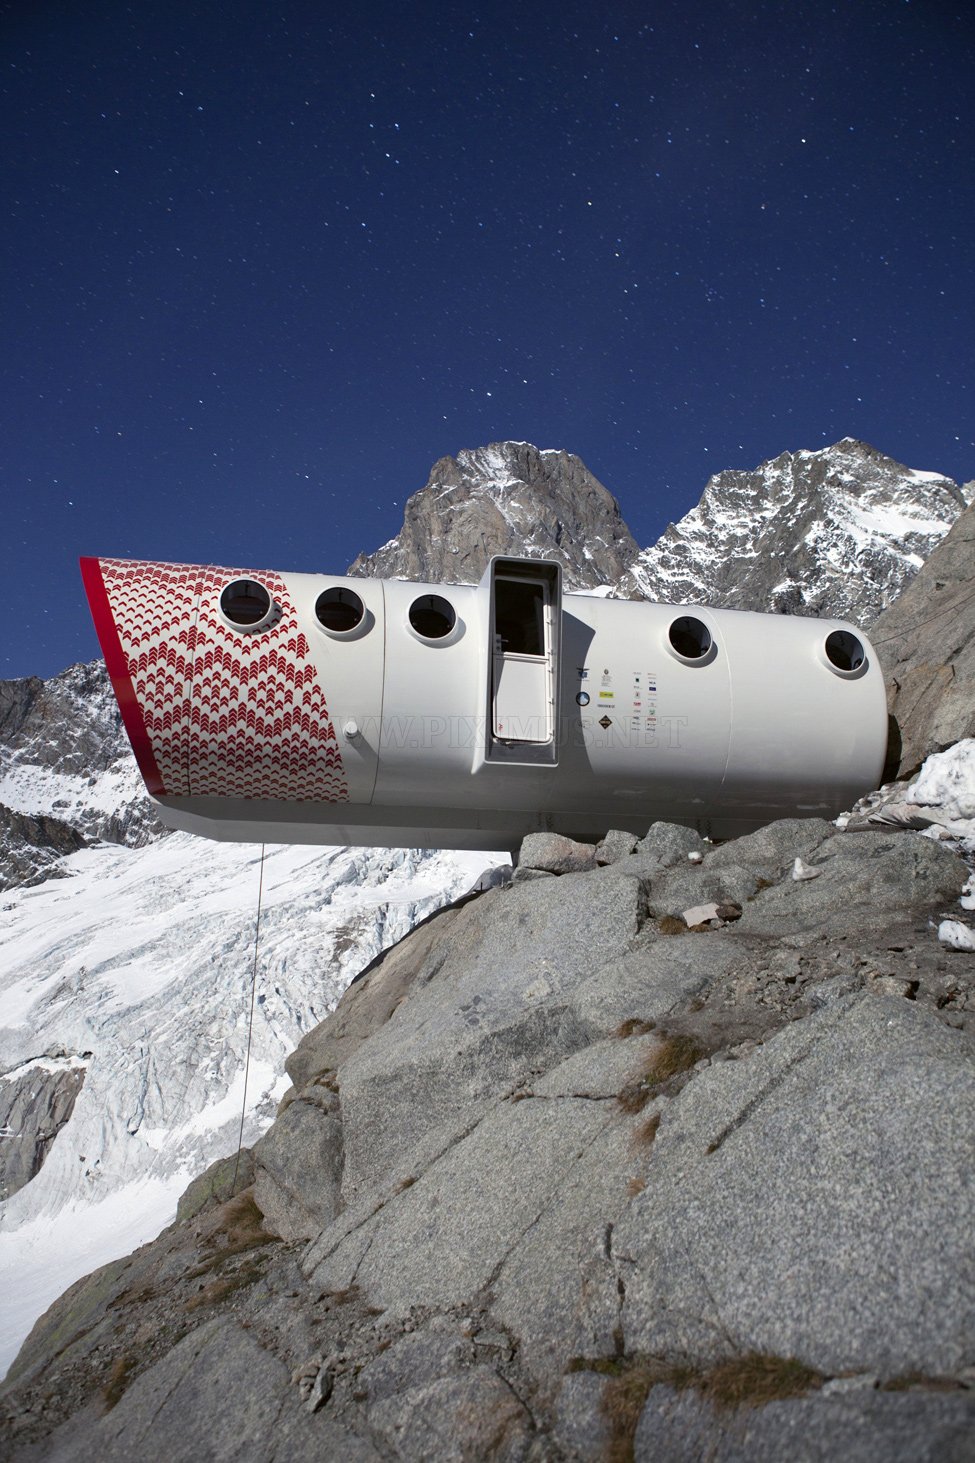 Refuge Gervasutti - a haven for rock climbers in the Alps